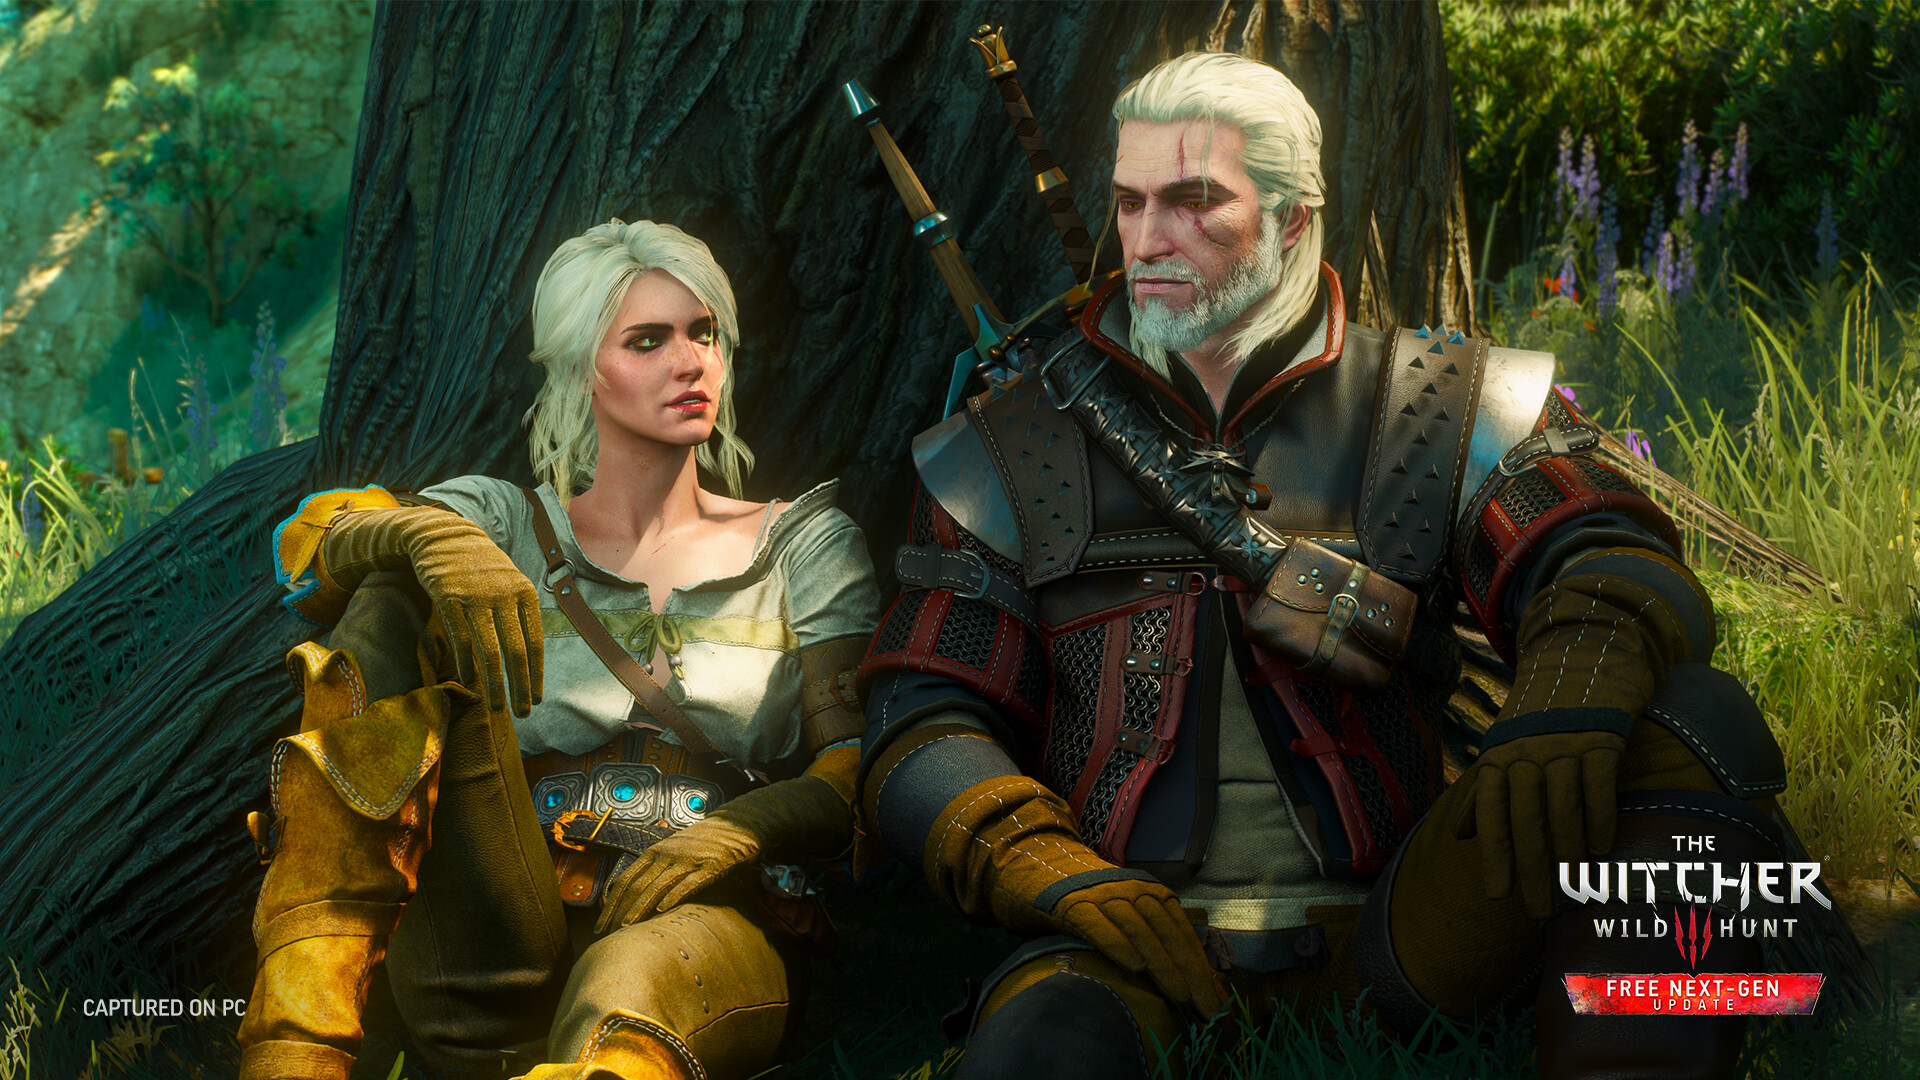 Nearly Half of CD Projekt Now Working on The Witcher 4 - IGN